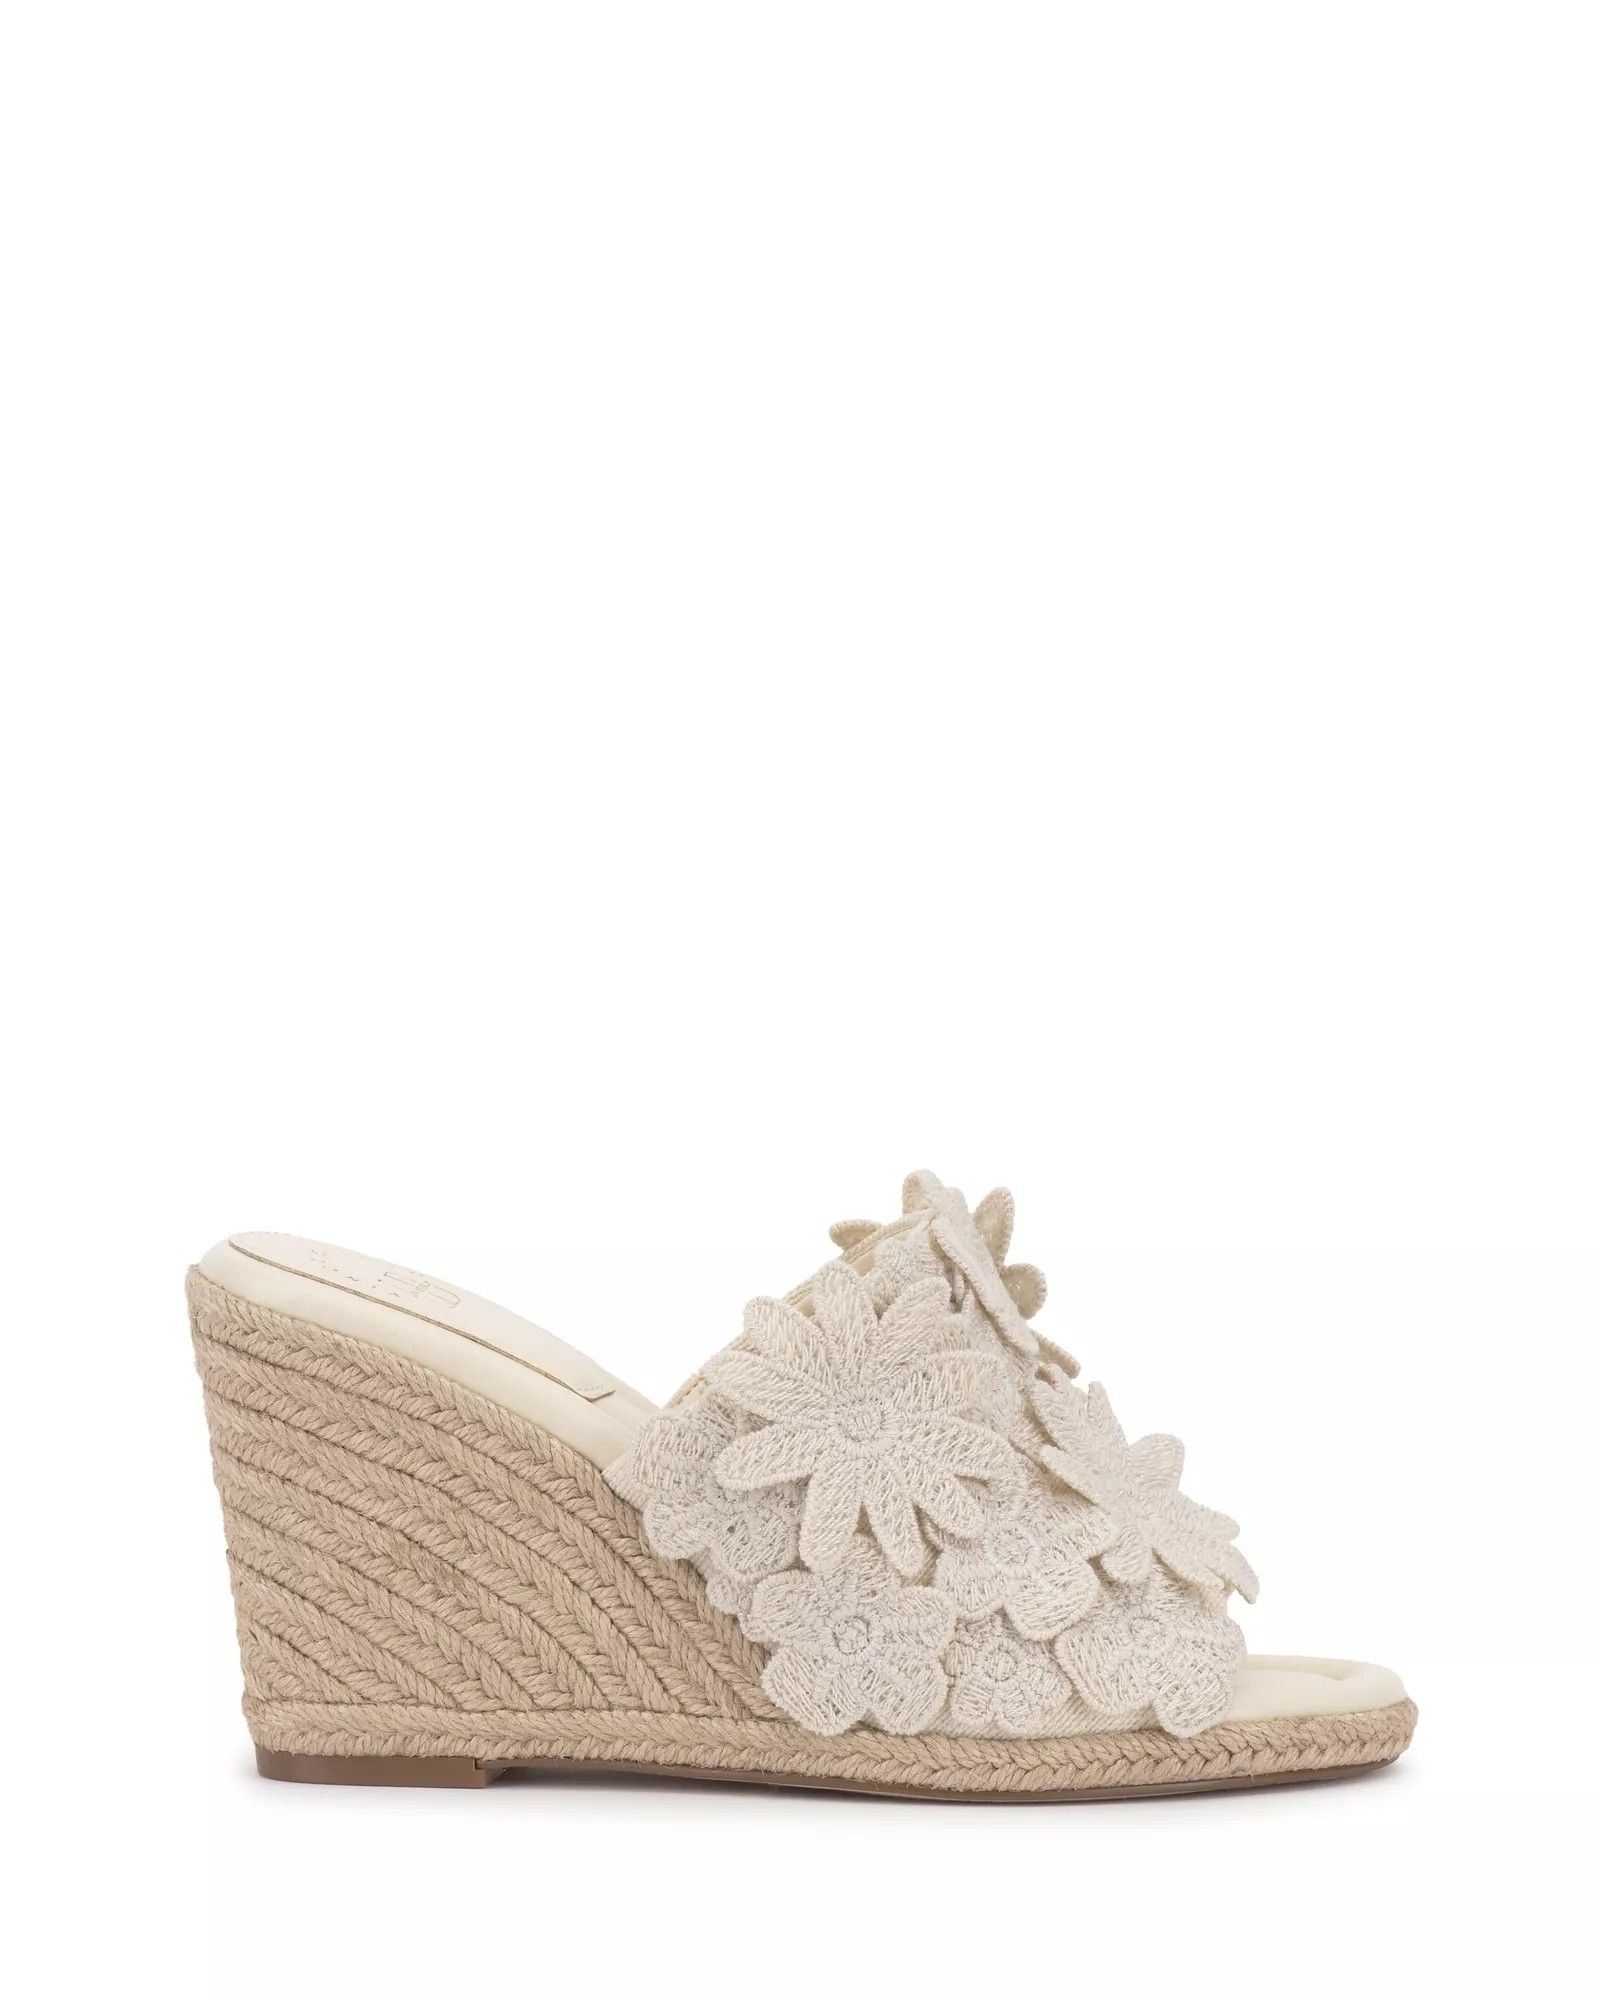 Vince Camuto x Laura Beverlin Daisy Wedge Mule | Vince Camuto